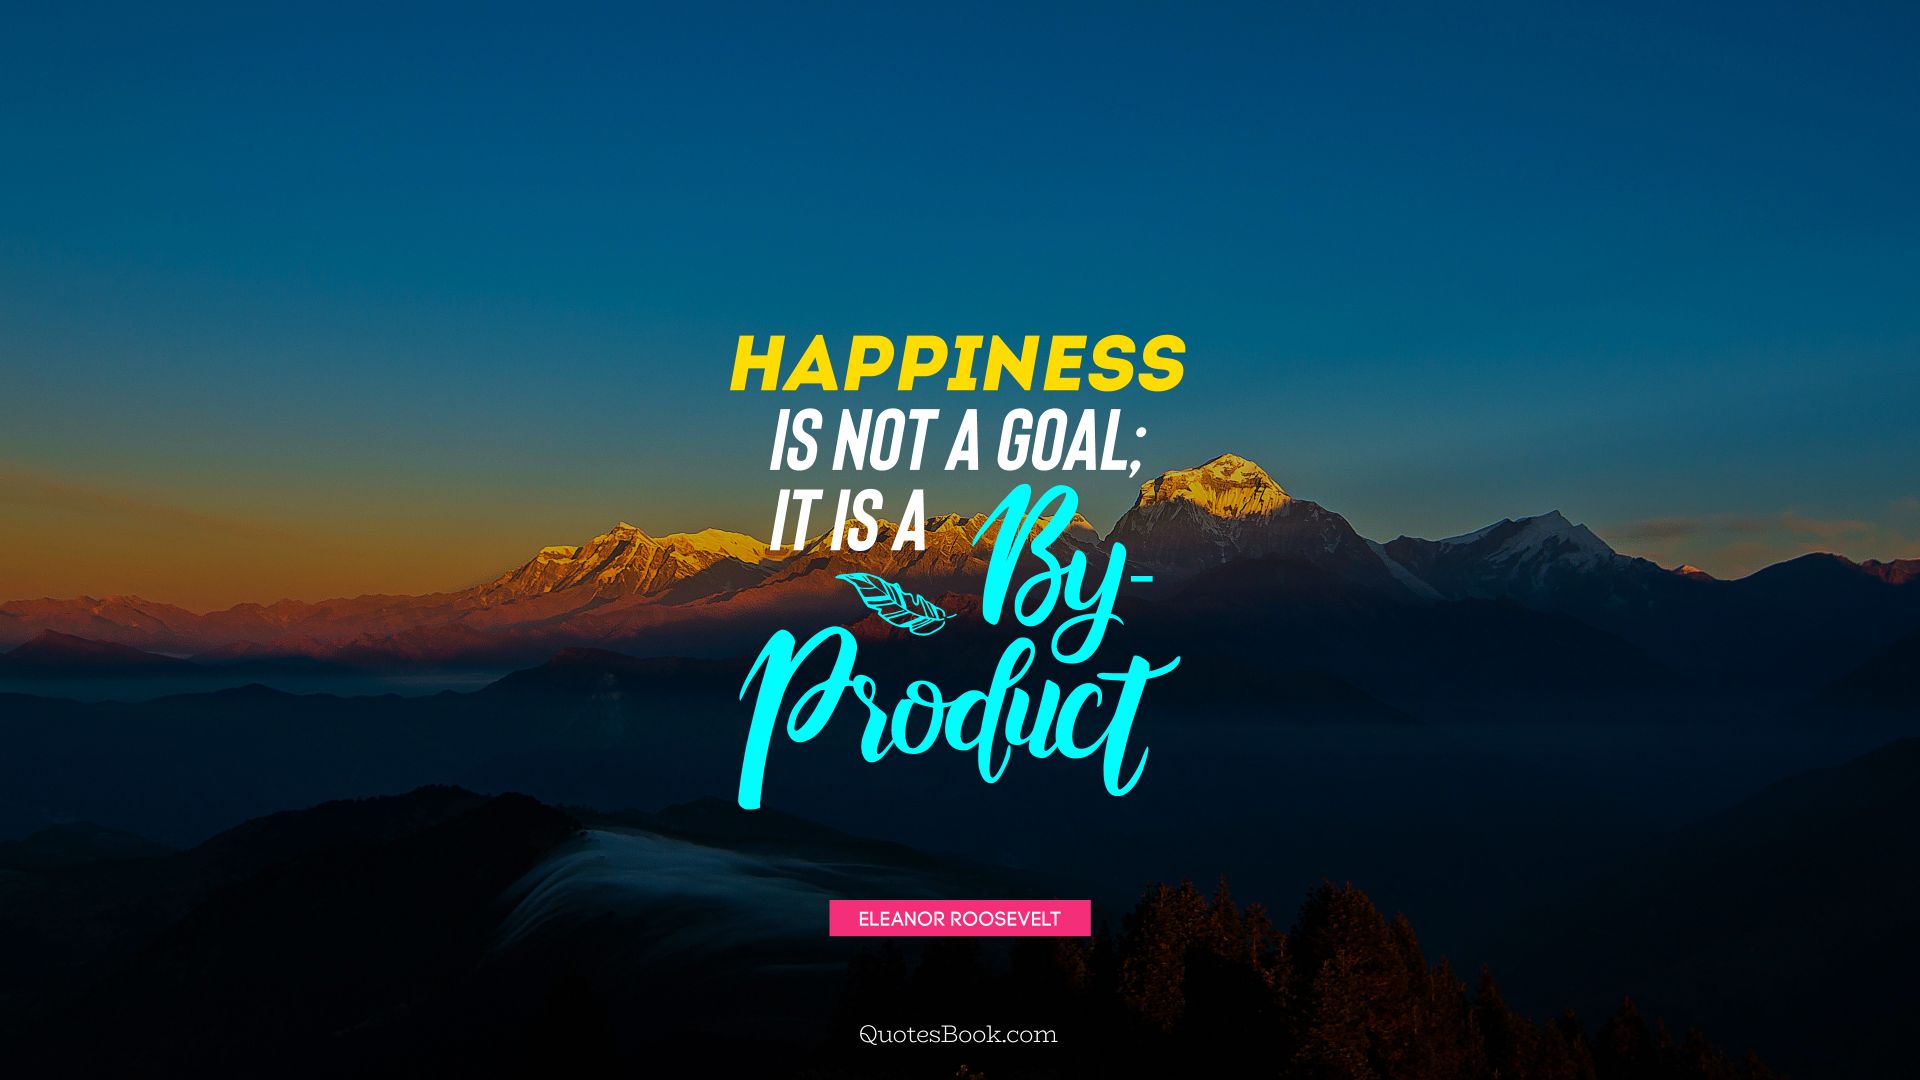 Happiness is not a goal; it is a by-product. - Quote by Eleanor Roosevelt